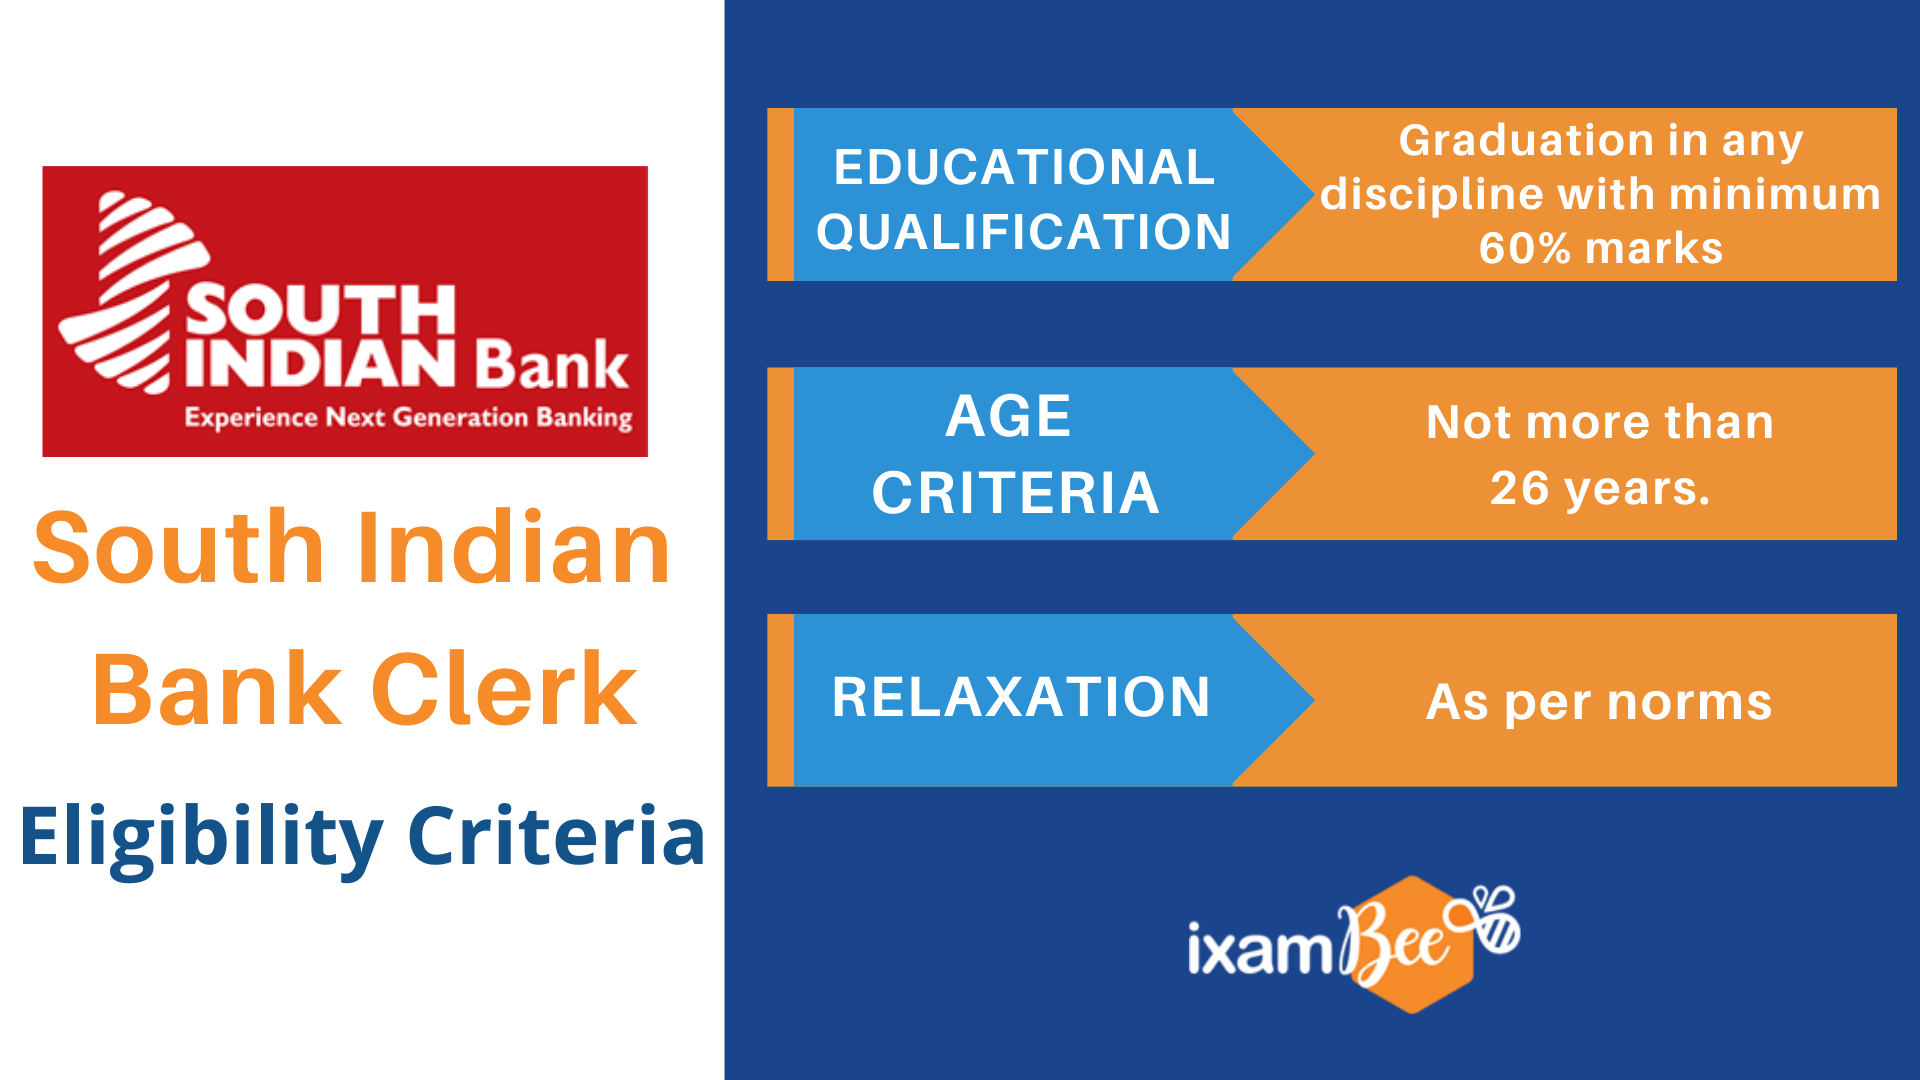 South Indian Bank Clerk Eligibility Criteria